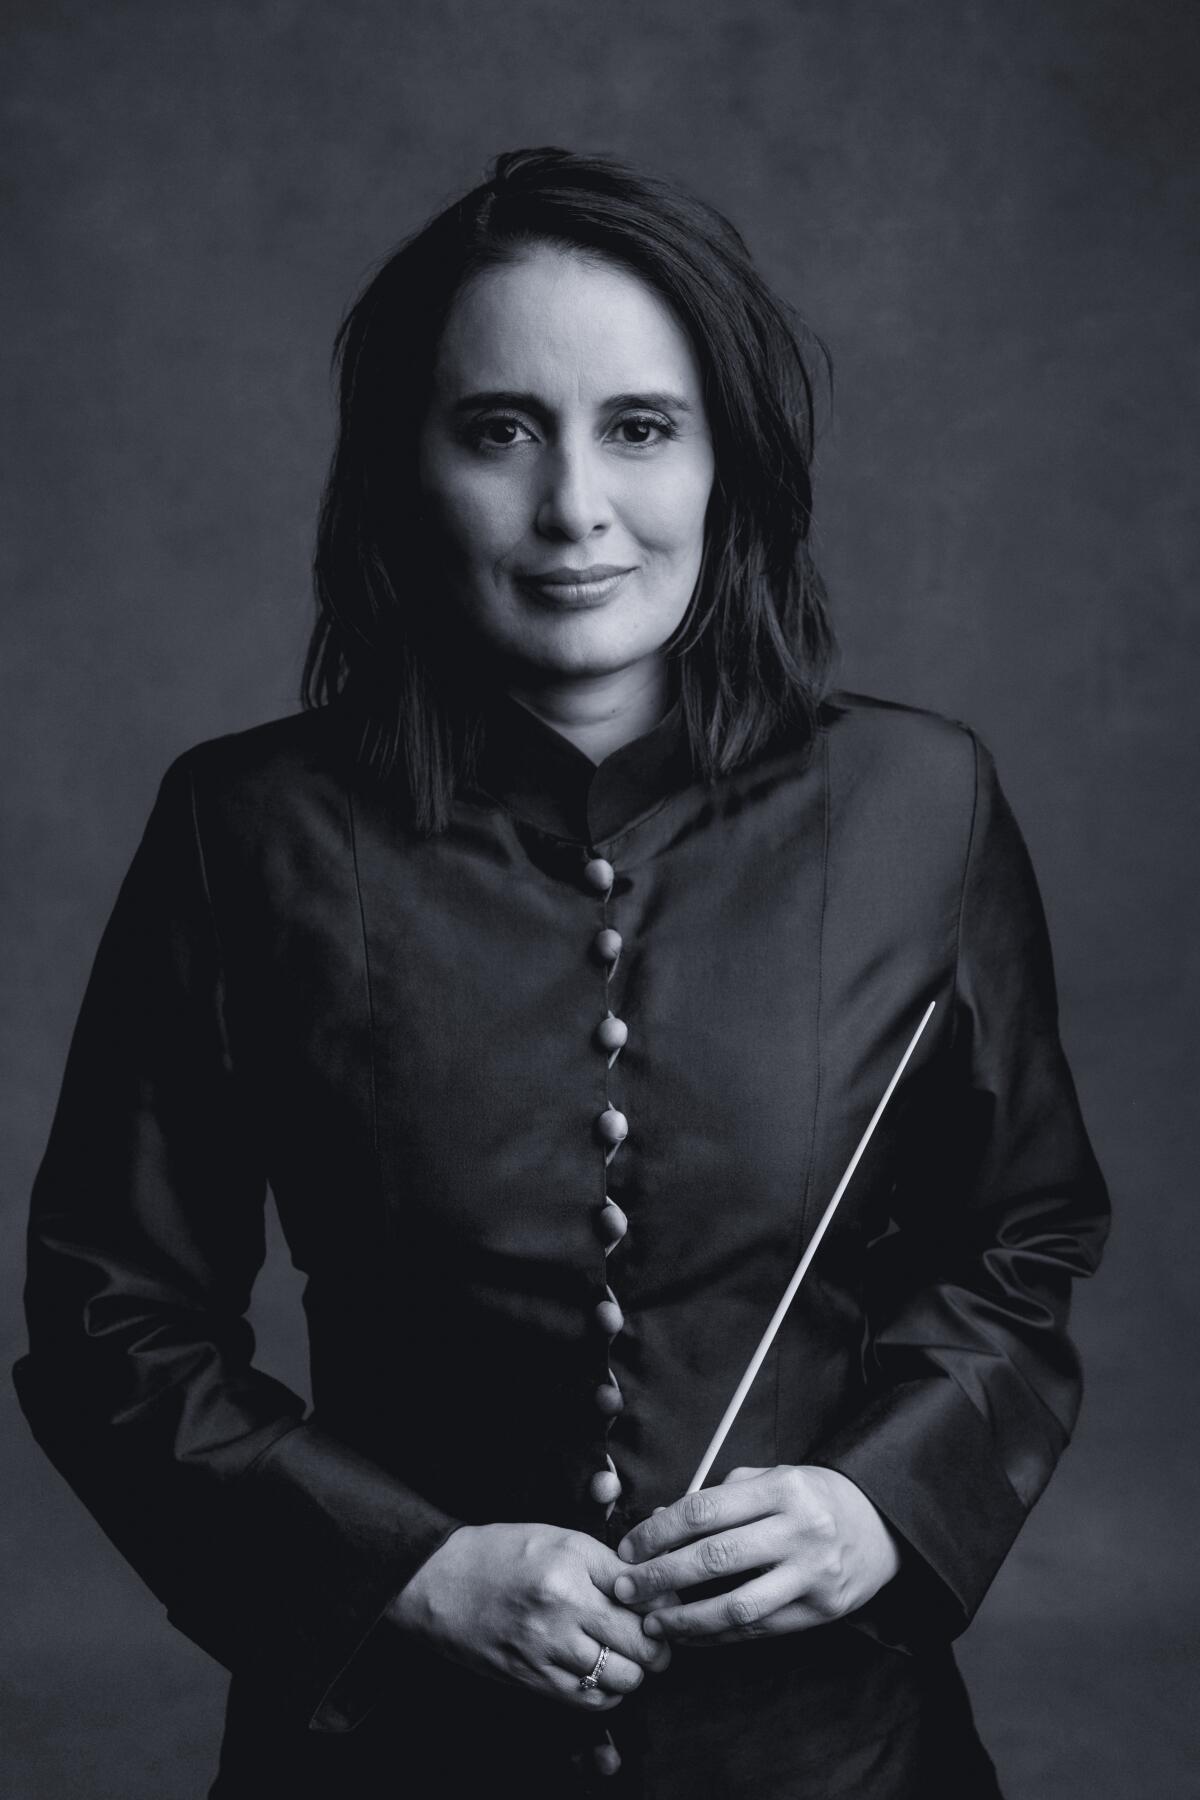 A woman with a conducting baton